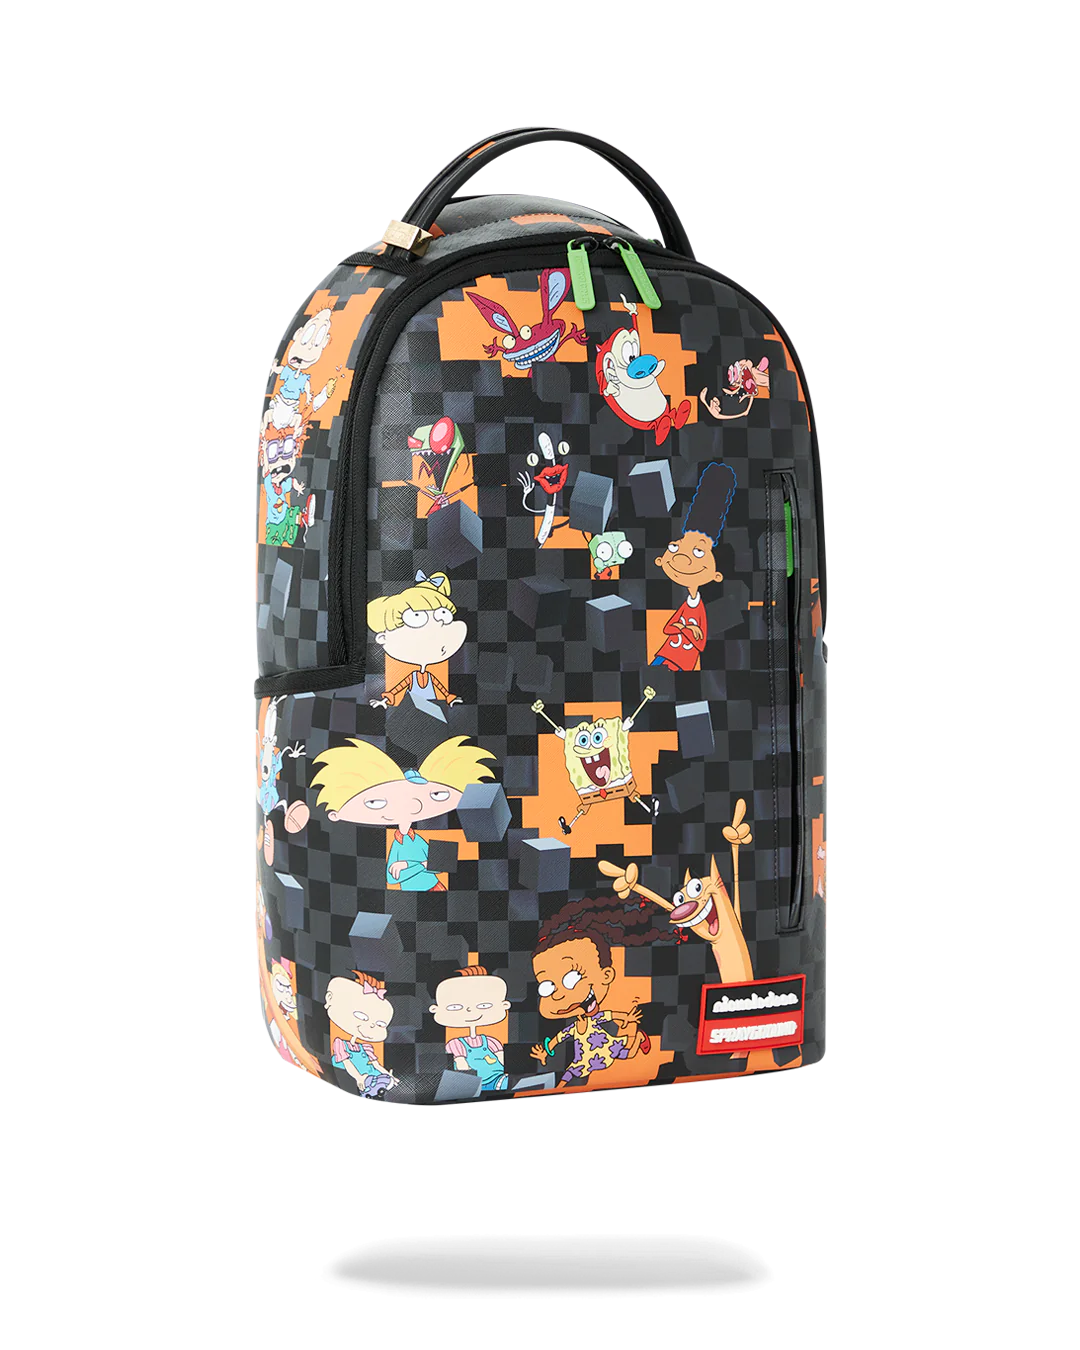 Nicktoons Brust Through Checkers Backpack